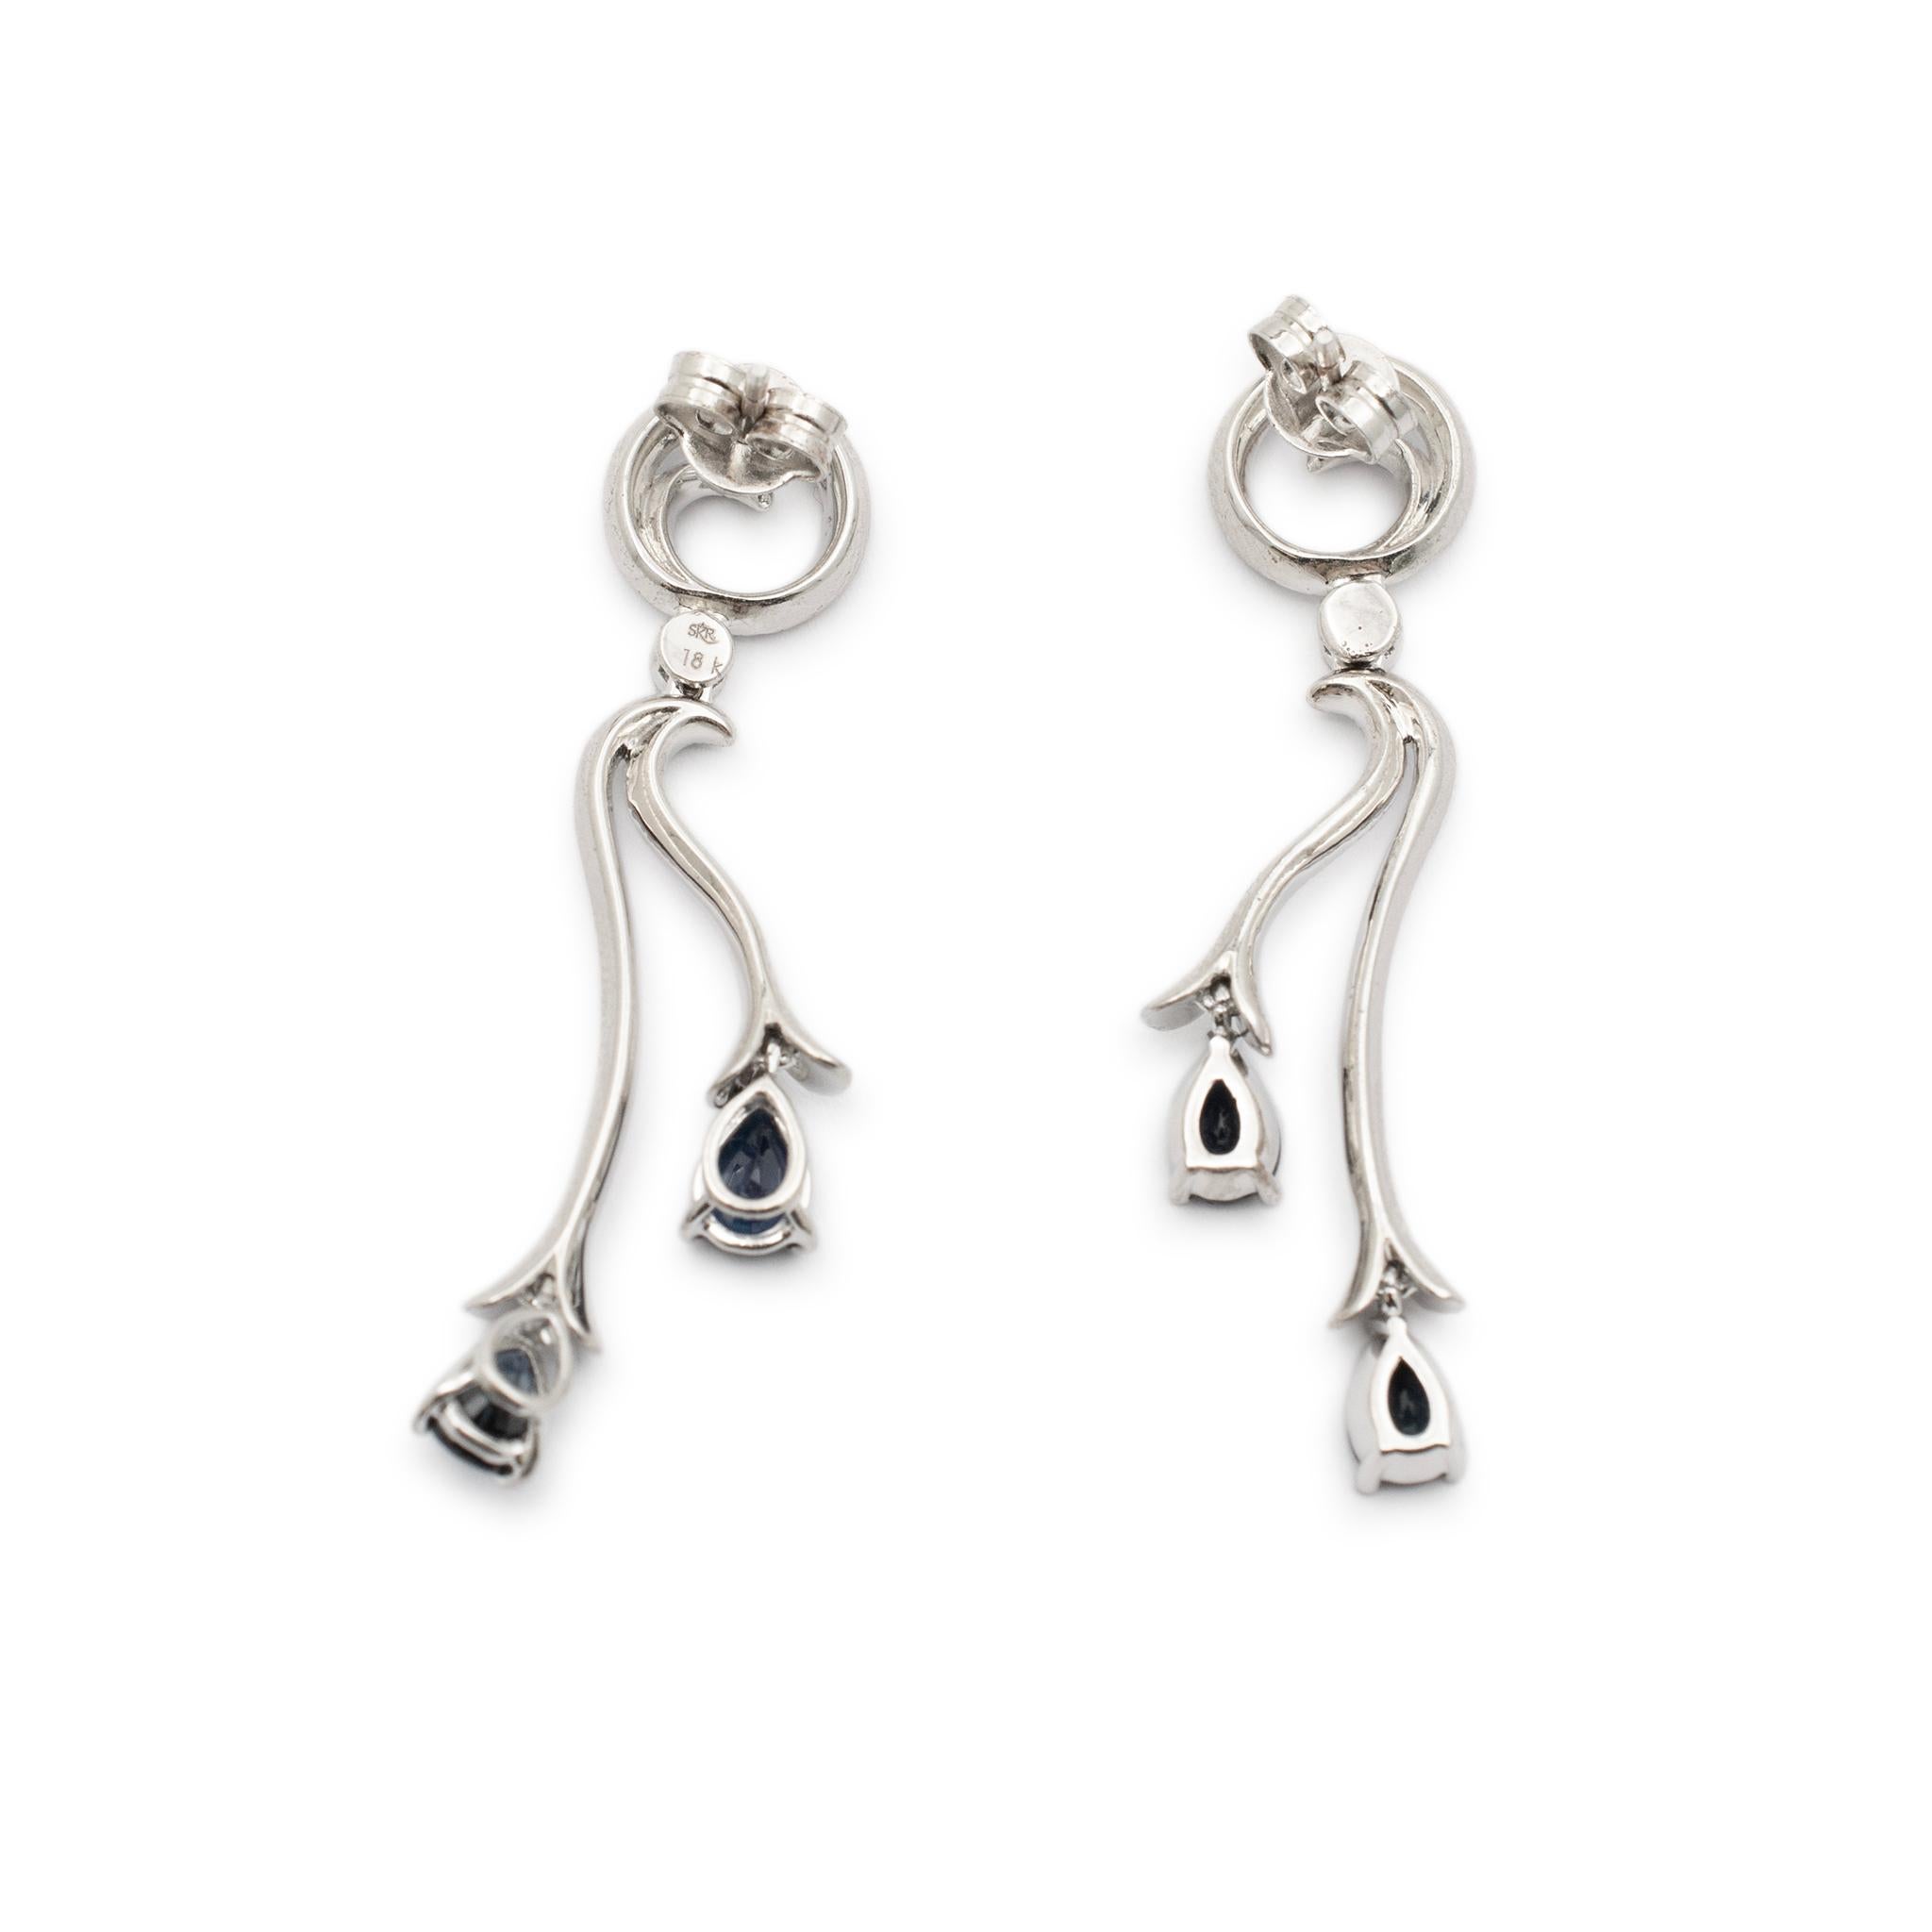 Gender: Ladies

Metal Type: 18K White Gold

Length: 1.75 Inches

Width: 10.10 mm

Weight: 7.90 grams

Ladies rhodium plated 18K white gold diamond and sapphire dangle drop earrings with push backs. Stamped 